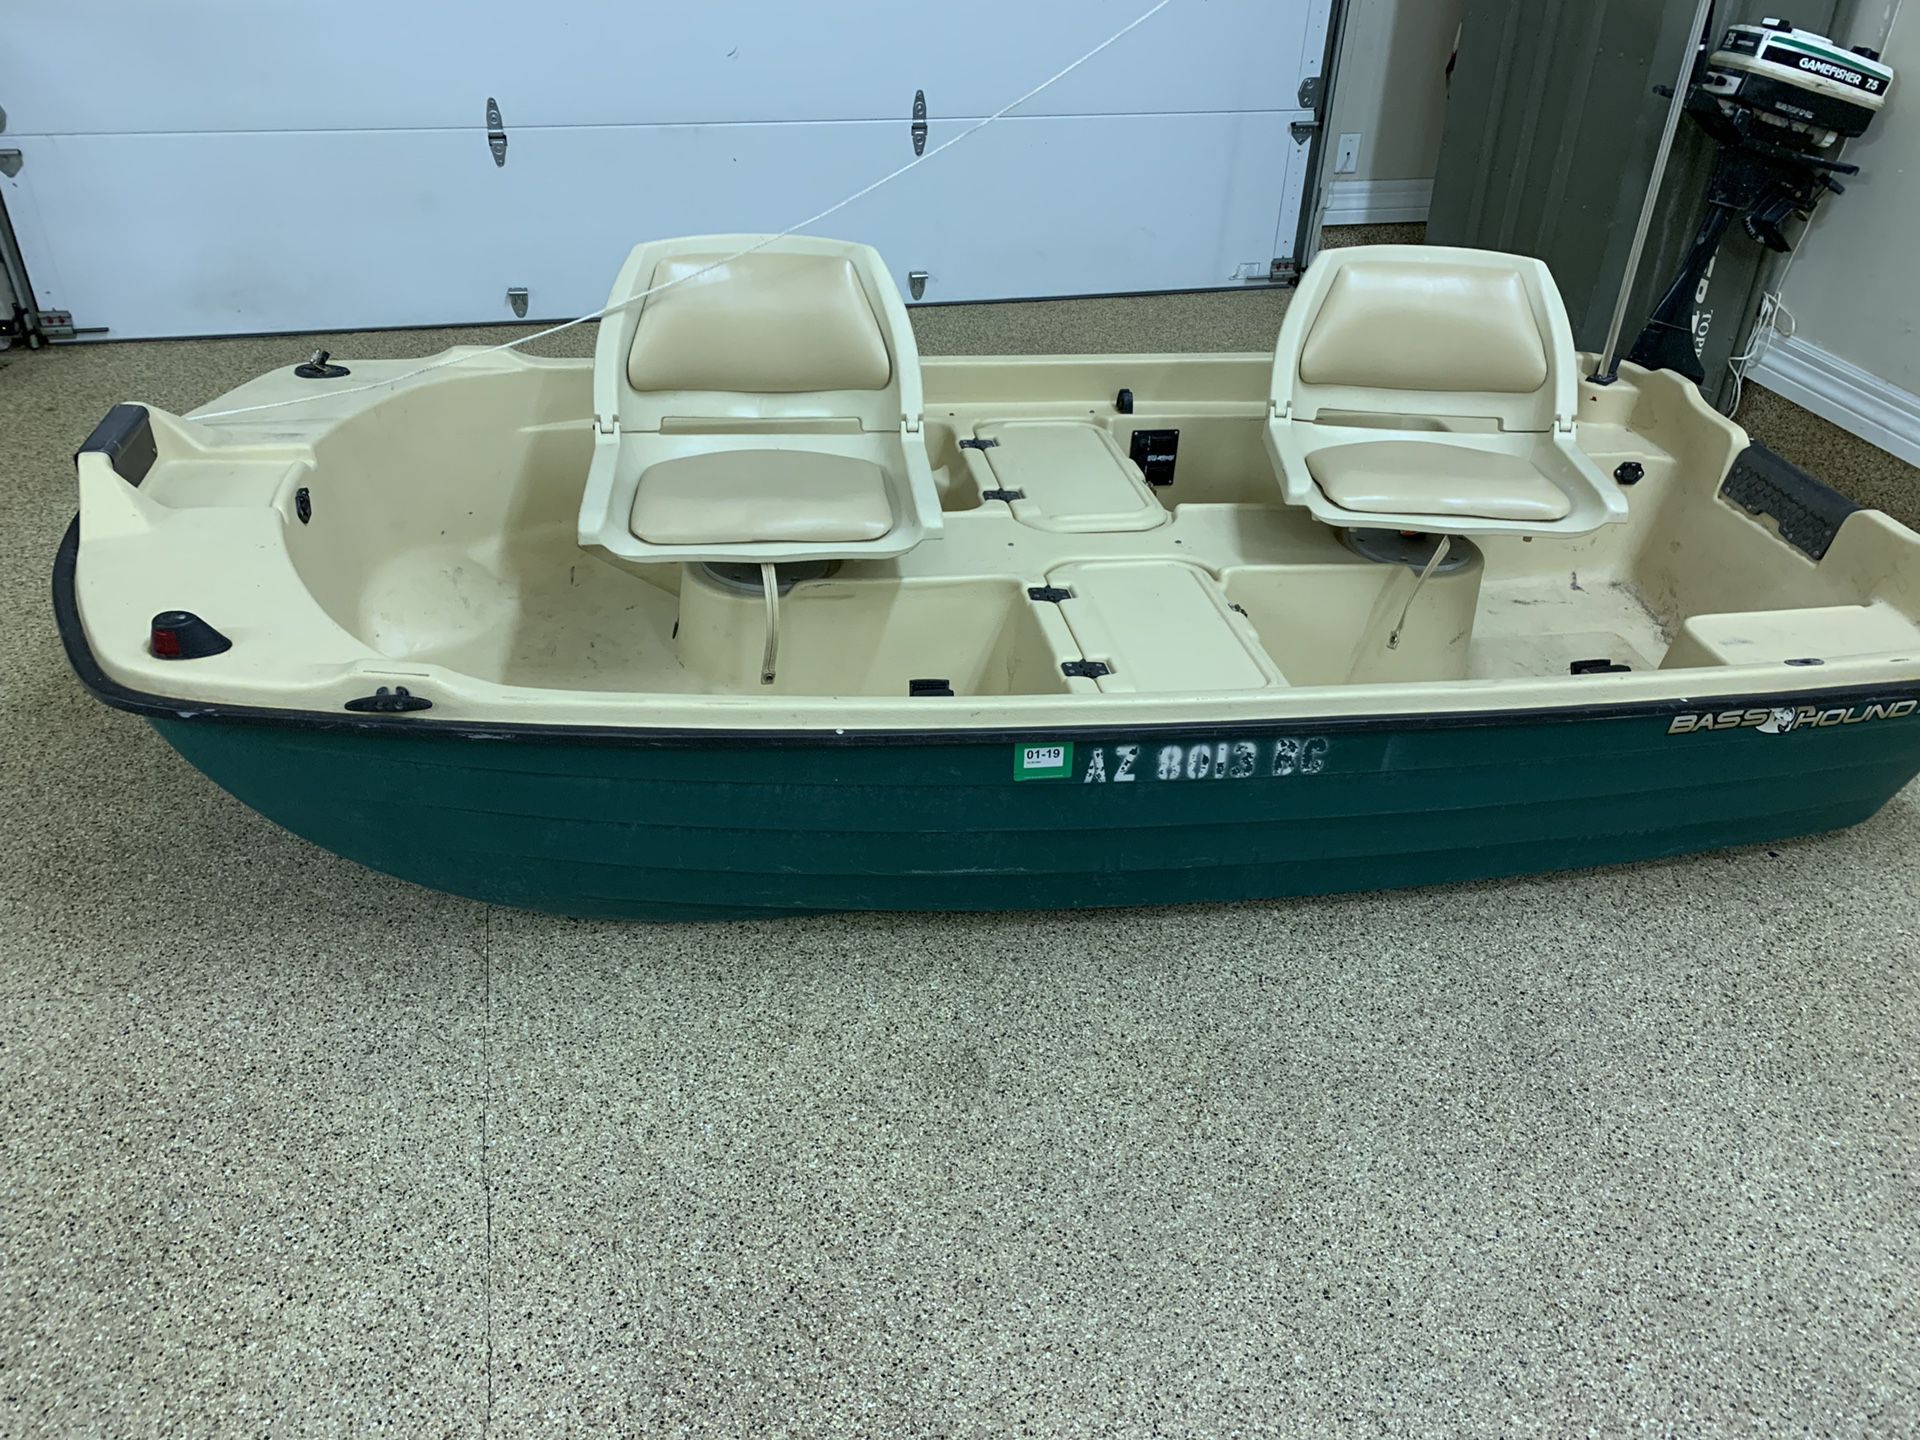 Bass Hound 904 fishing boat for Sale in Peoria, AZ - OfferUp